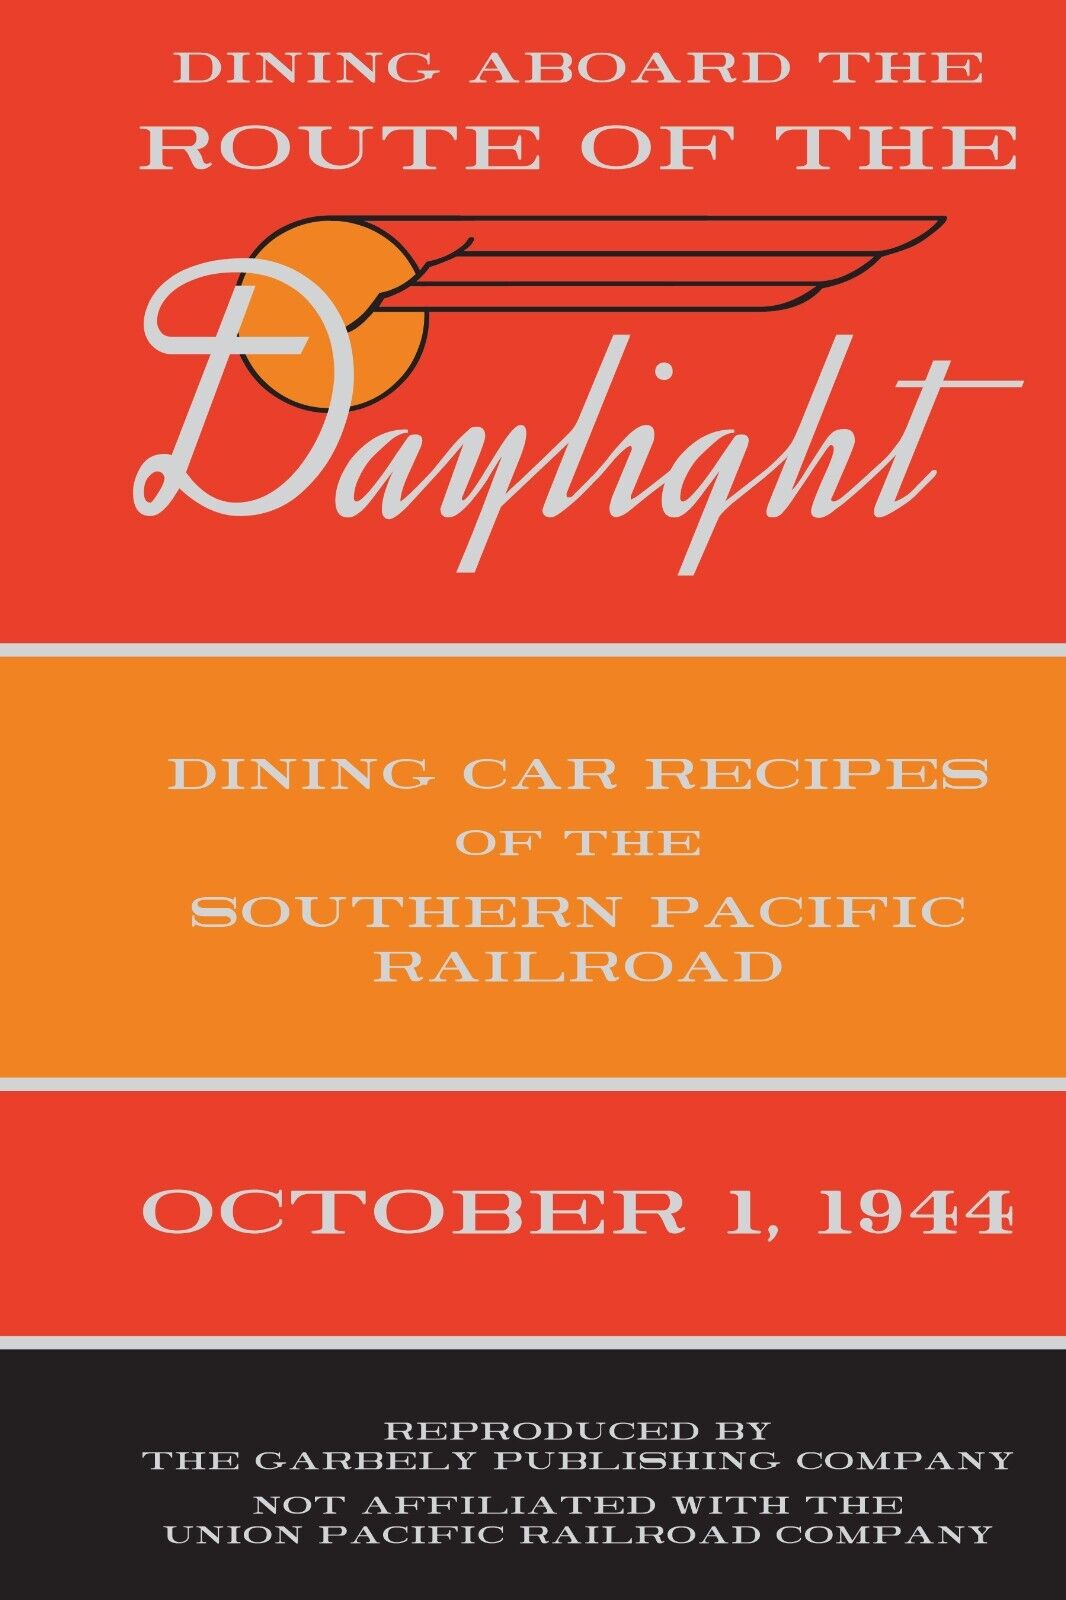 Dining aboard the Route of the Daylight: Southern Pacific Railroad Recipes, 1944